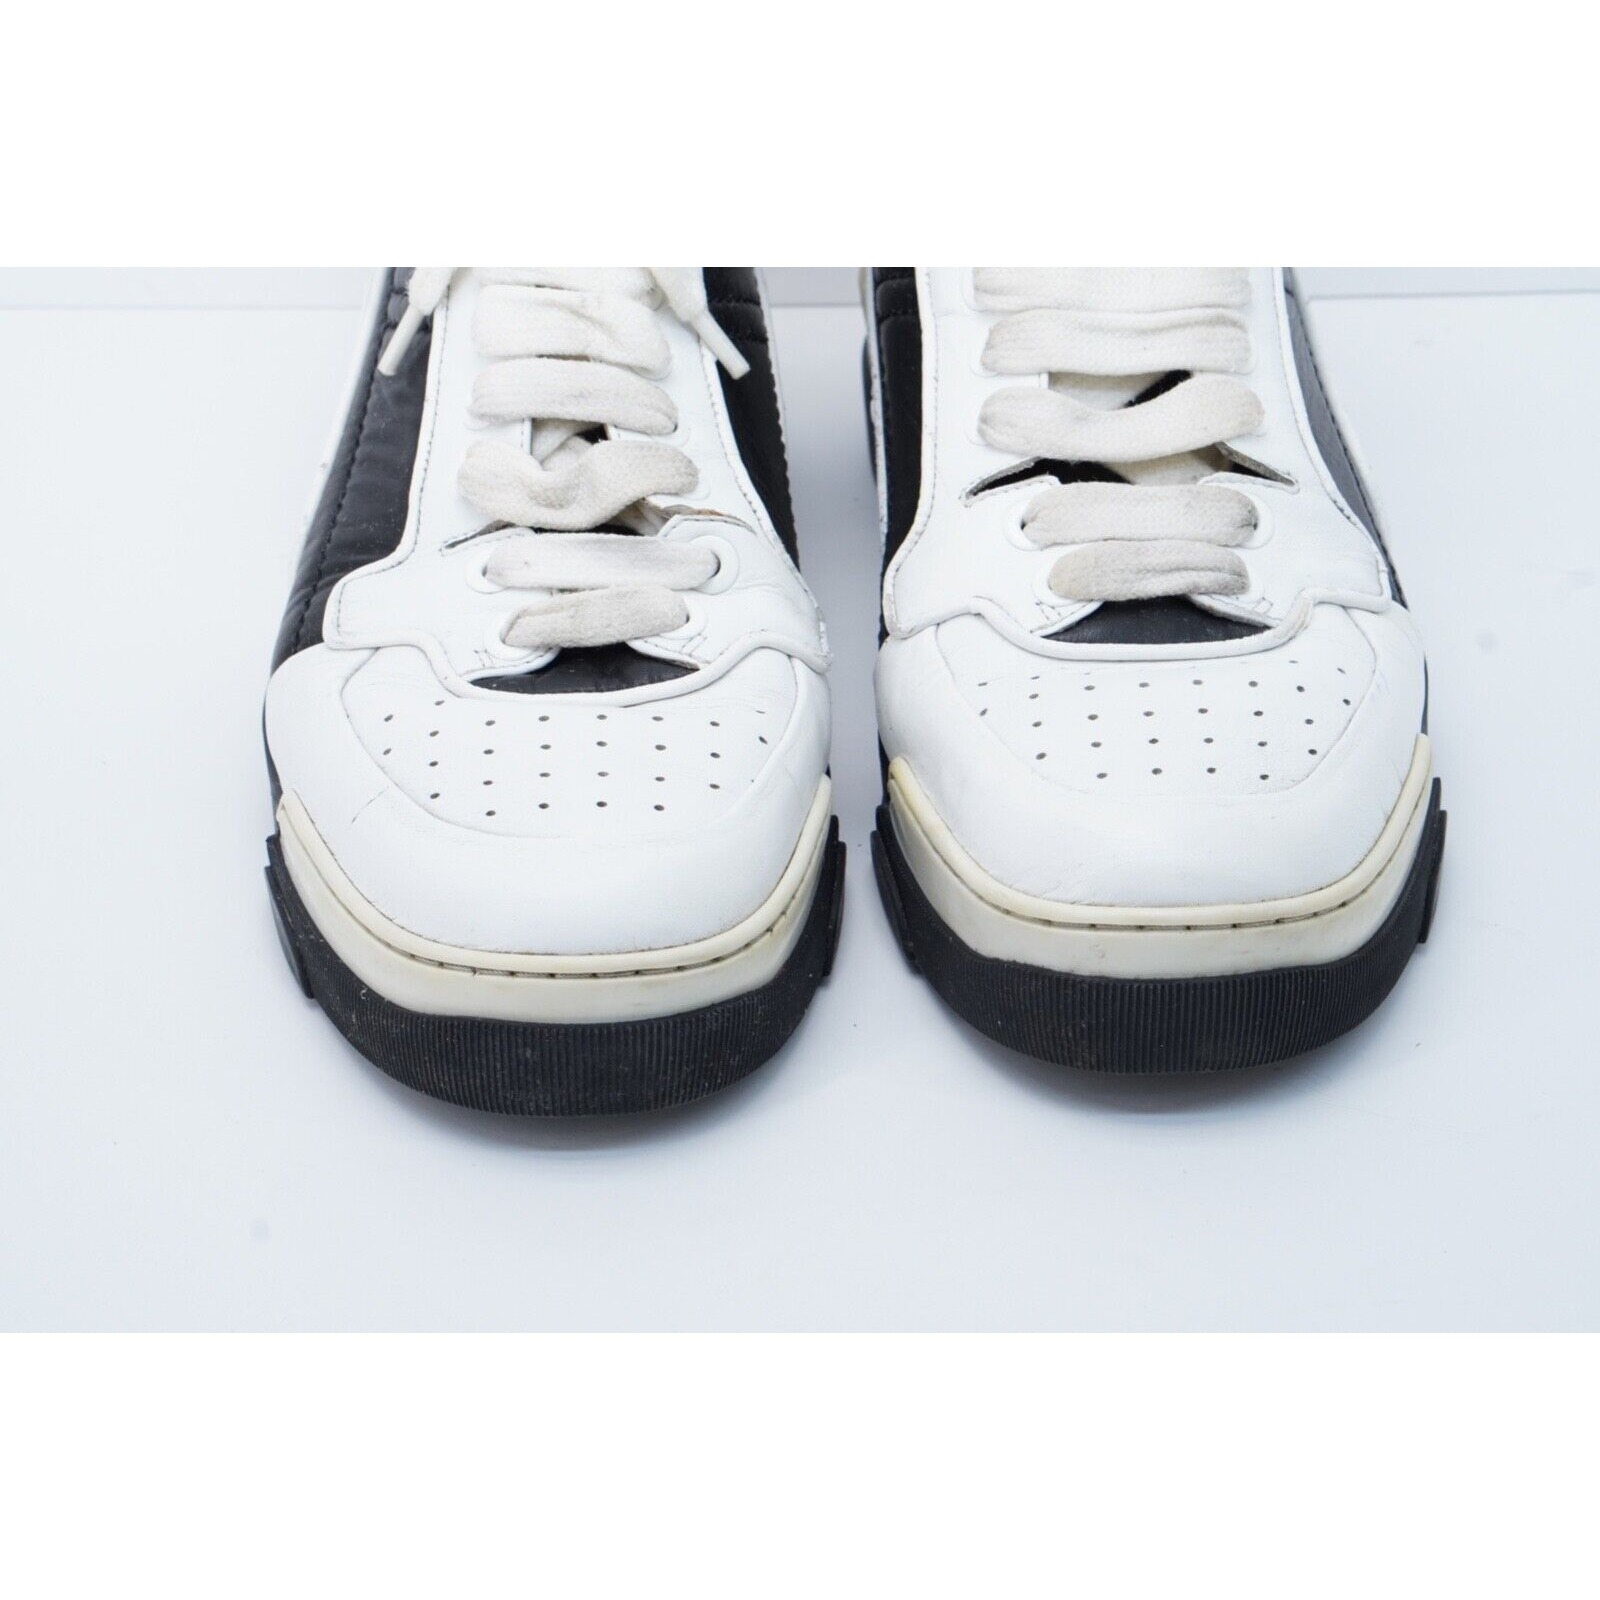 Givenchy Tyson Star Sneakers Shoes White Leather High Top 44 - 4